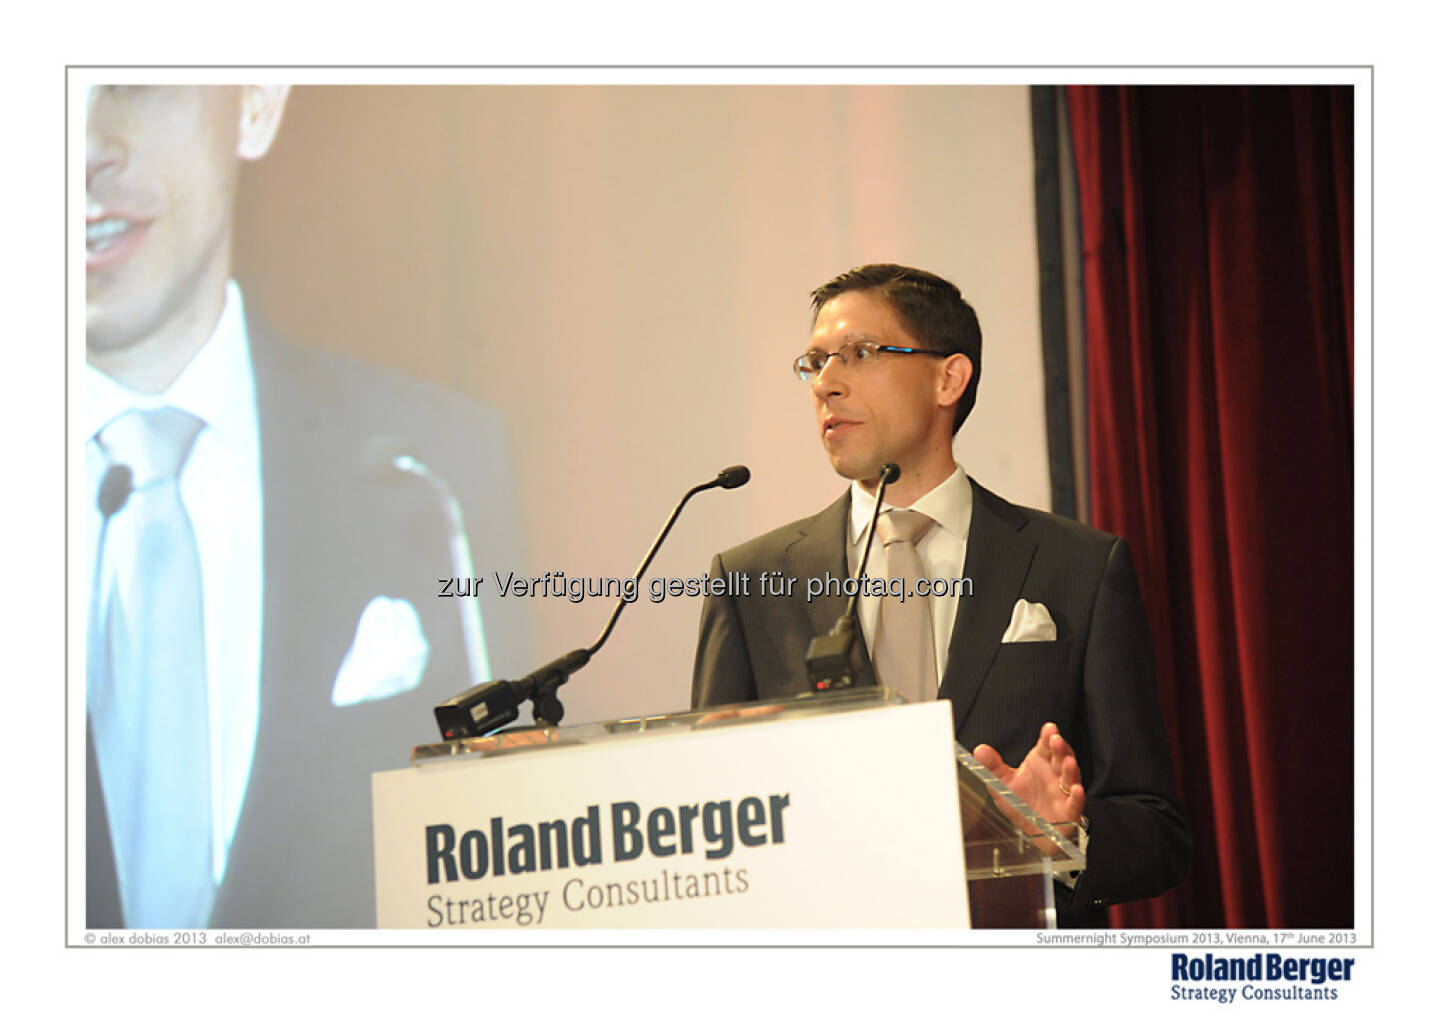 Rupert Petry, Managing Partner, Roland Berger Strategy Consultants